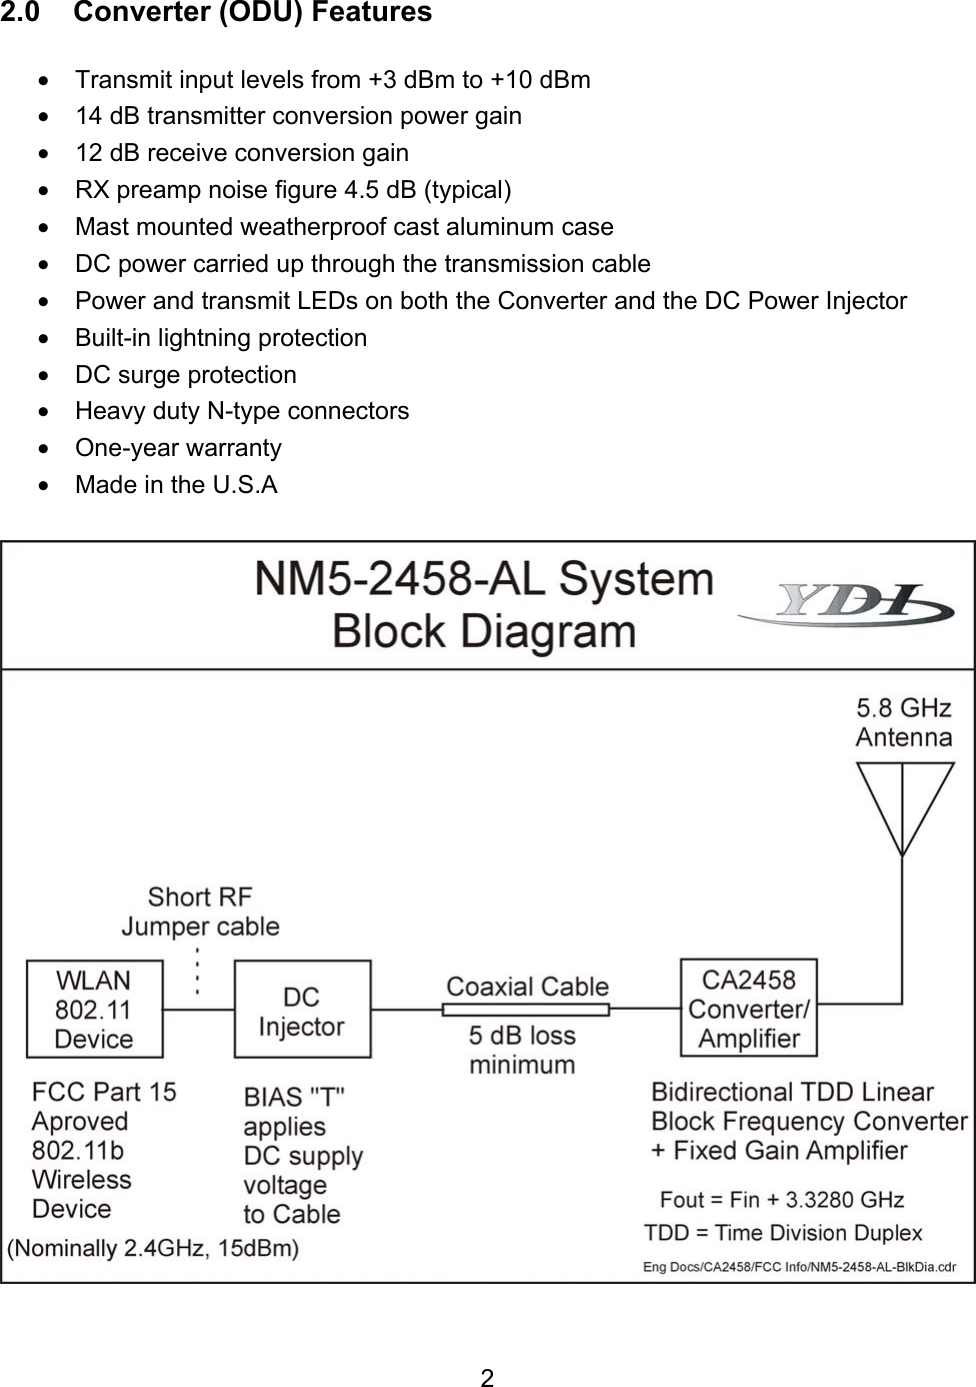  22.0    Converter (ODU) Features  •  Transmit input levels from +3 dBm to +10 dBm •  14 dB transmitter conversion power gain •  12 dB receive conversion gain  •  RX preamp noise figure 4.5 dB (typical) •  Mast mounted weatherproof cast aluminum case •  DC power carried up through the transmission cable •  Power and transmit LEDs on both the Converter and the DC Power Injector •  Built-in lightning protection  •  DC surge protection •  Heavy duty N-type connectors •  One-year warranty •  Made in the U.S.A   